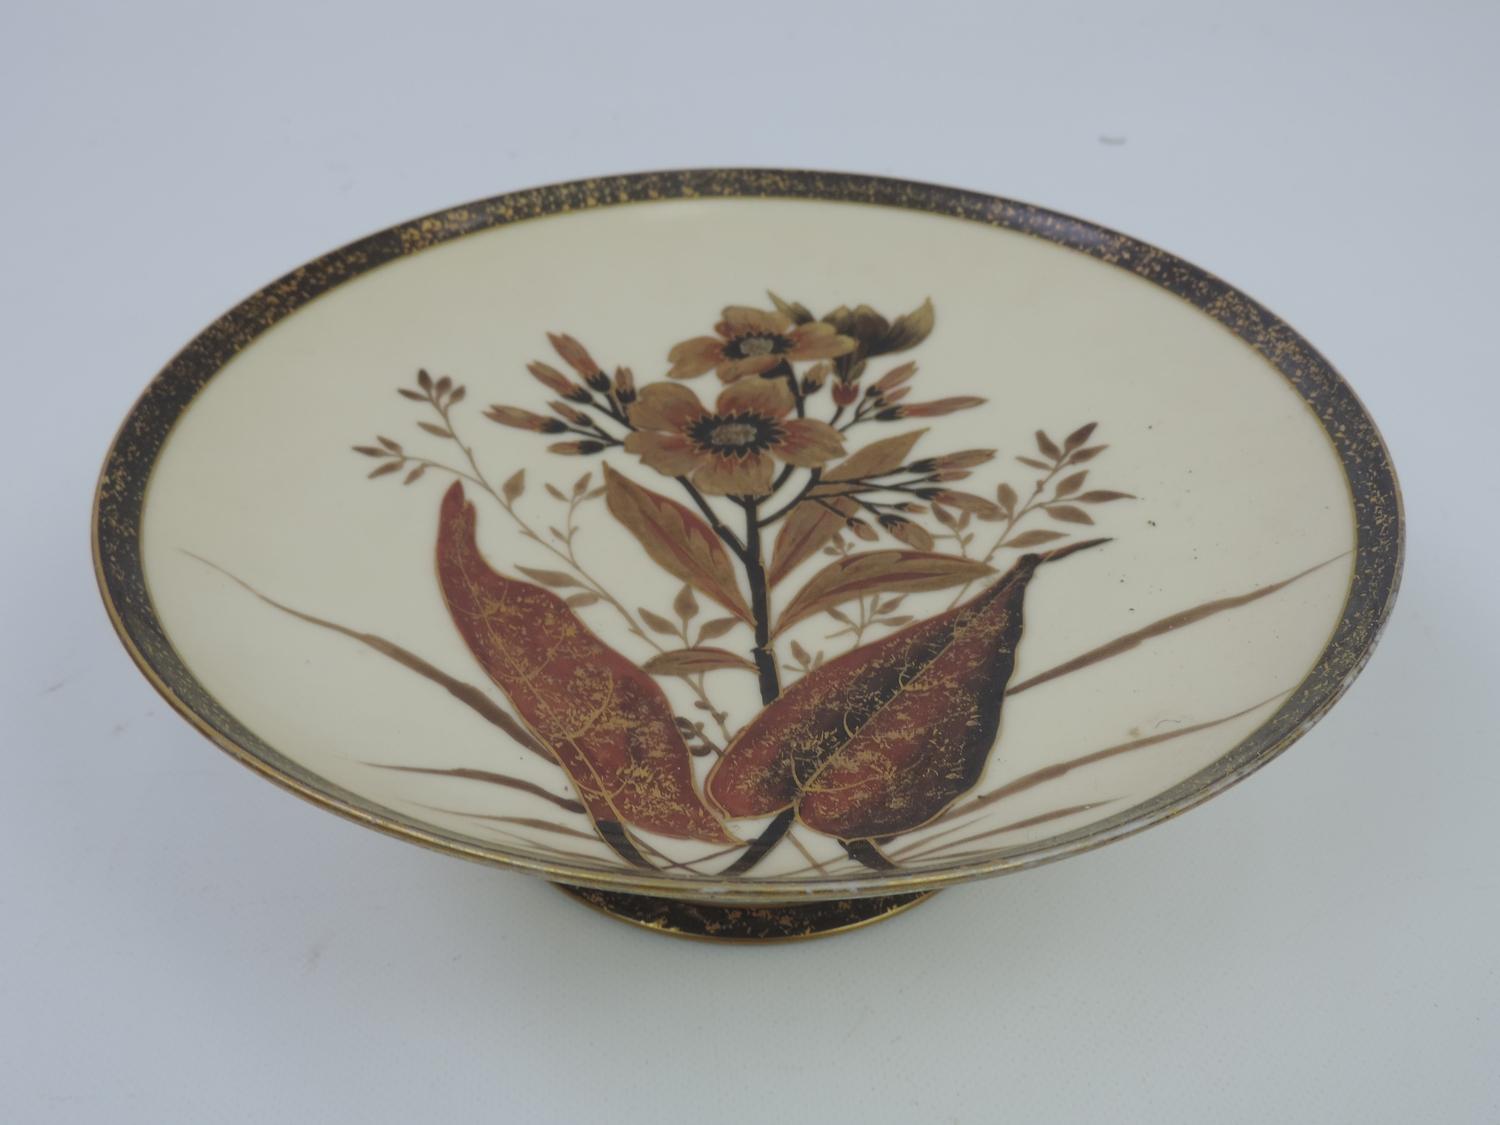 3x Pieces of Limoges Porcelain Circa 1880s - Image 2 of 7